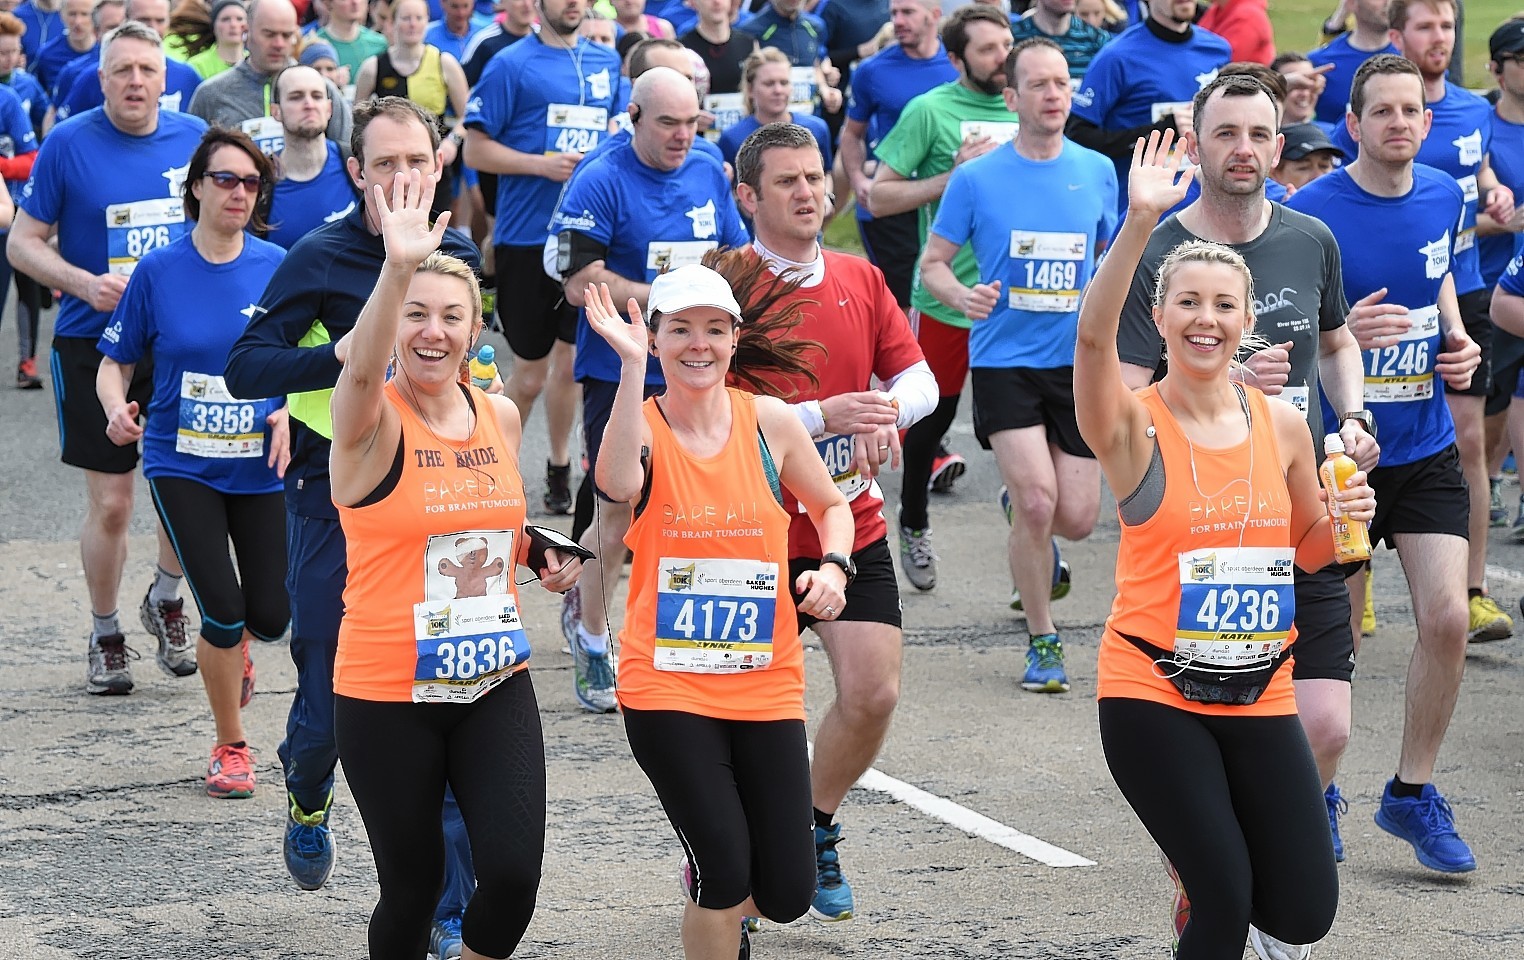 Runners take on the 10k along Aberdeen beach boulevard. Picture by Kevin Emslie